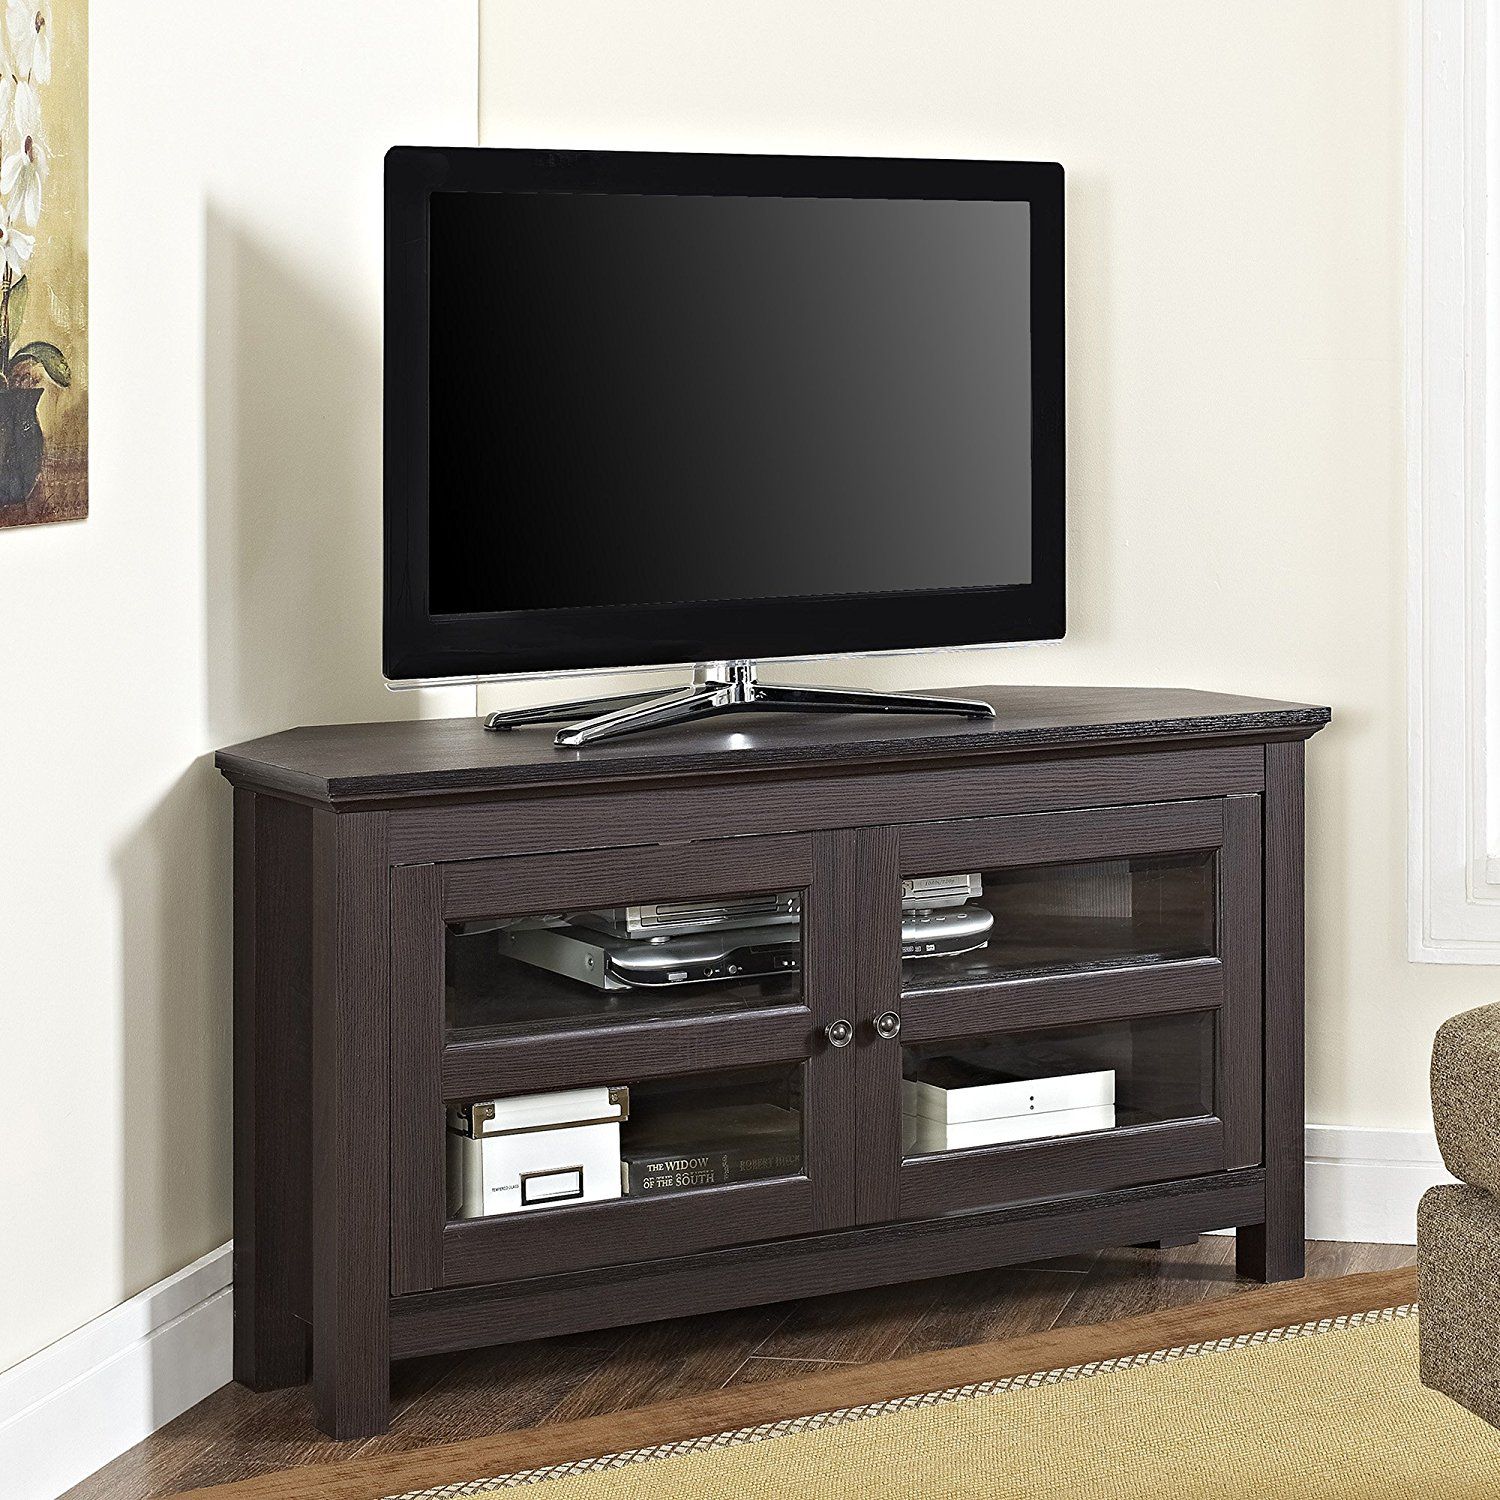 Top 10 Best Modern Tall Corner Tv Stands In 2021 Reviews Pertaining To Priya Corner Tv Stands (View 4 of 15)